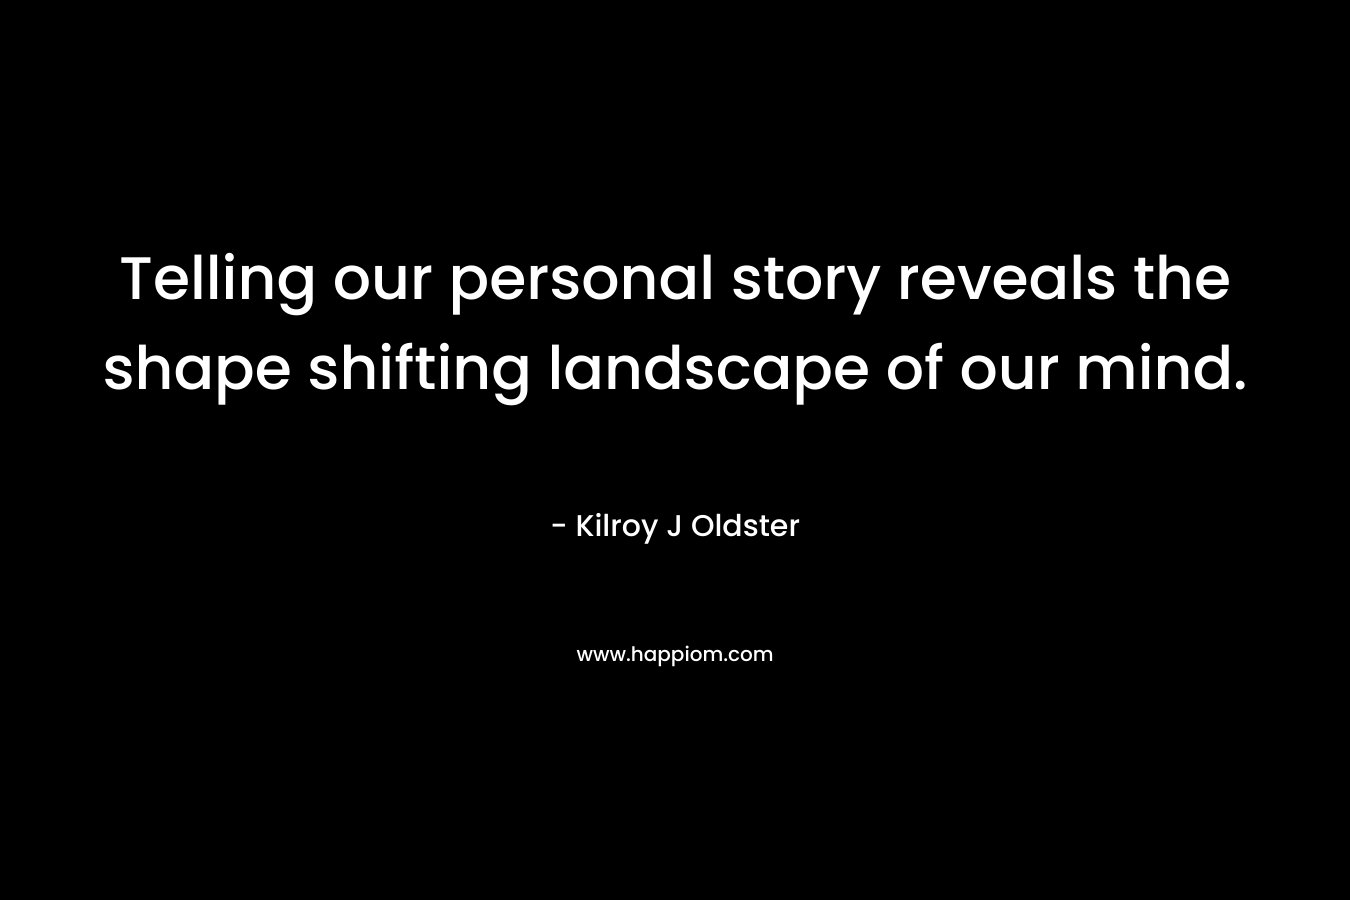 Telling our personal story reveals the shape shifting landscape of our mind.